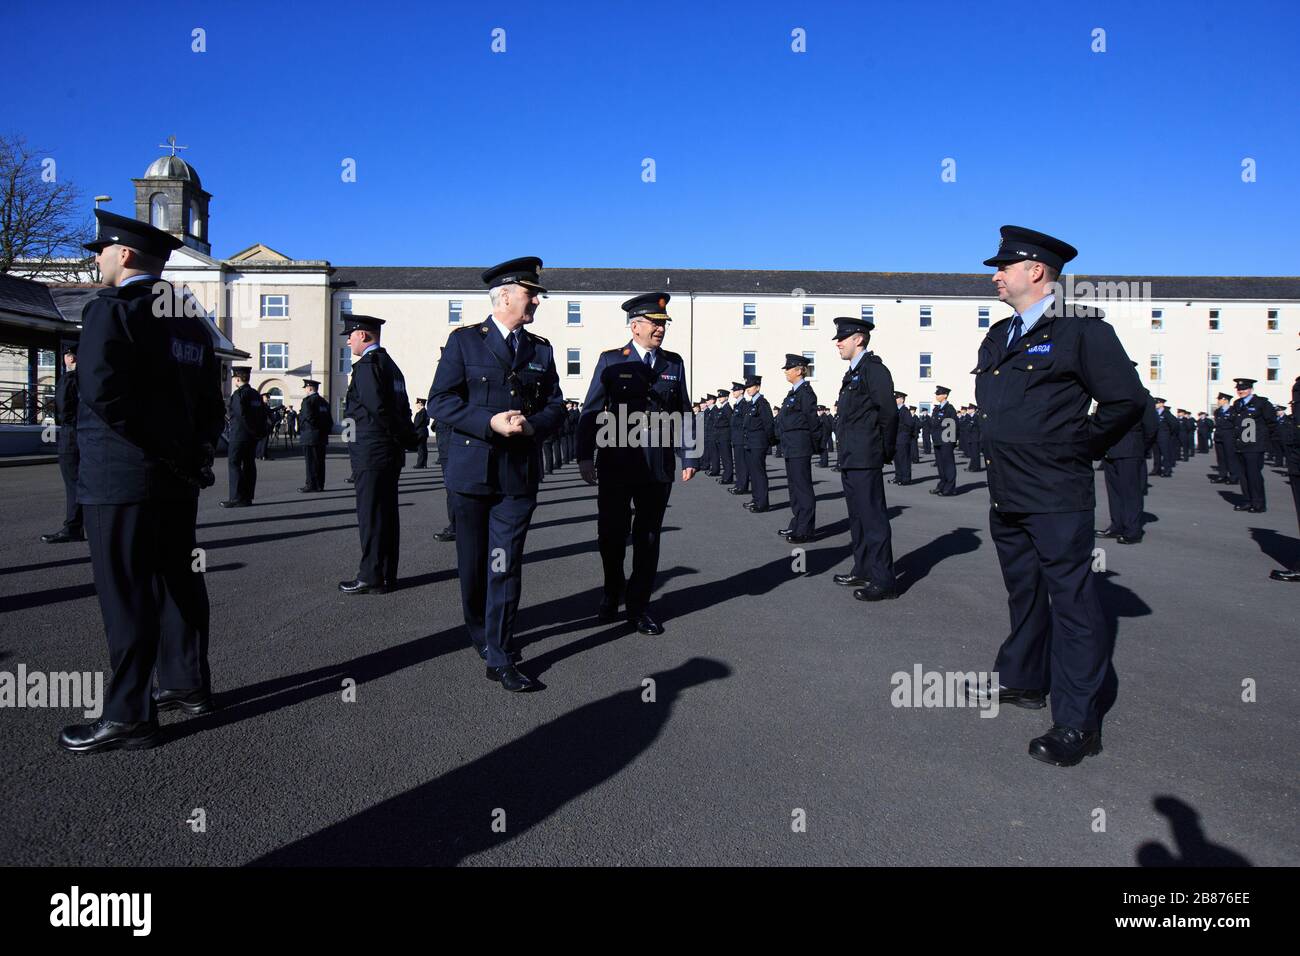 Commissioner Drew Harris and Chief Superintendent Pat Murray inspect the 319 new Gardai during an attestation ceremony at the Garda Training College in Templemore, Co Tipperary. The new Irish police will be deployed to stations nationwide to help respond to the Covid-19 crisis. Stock Photo